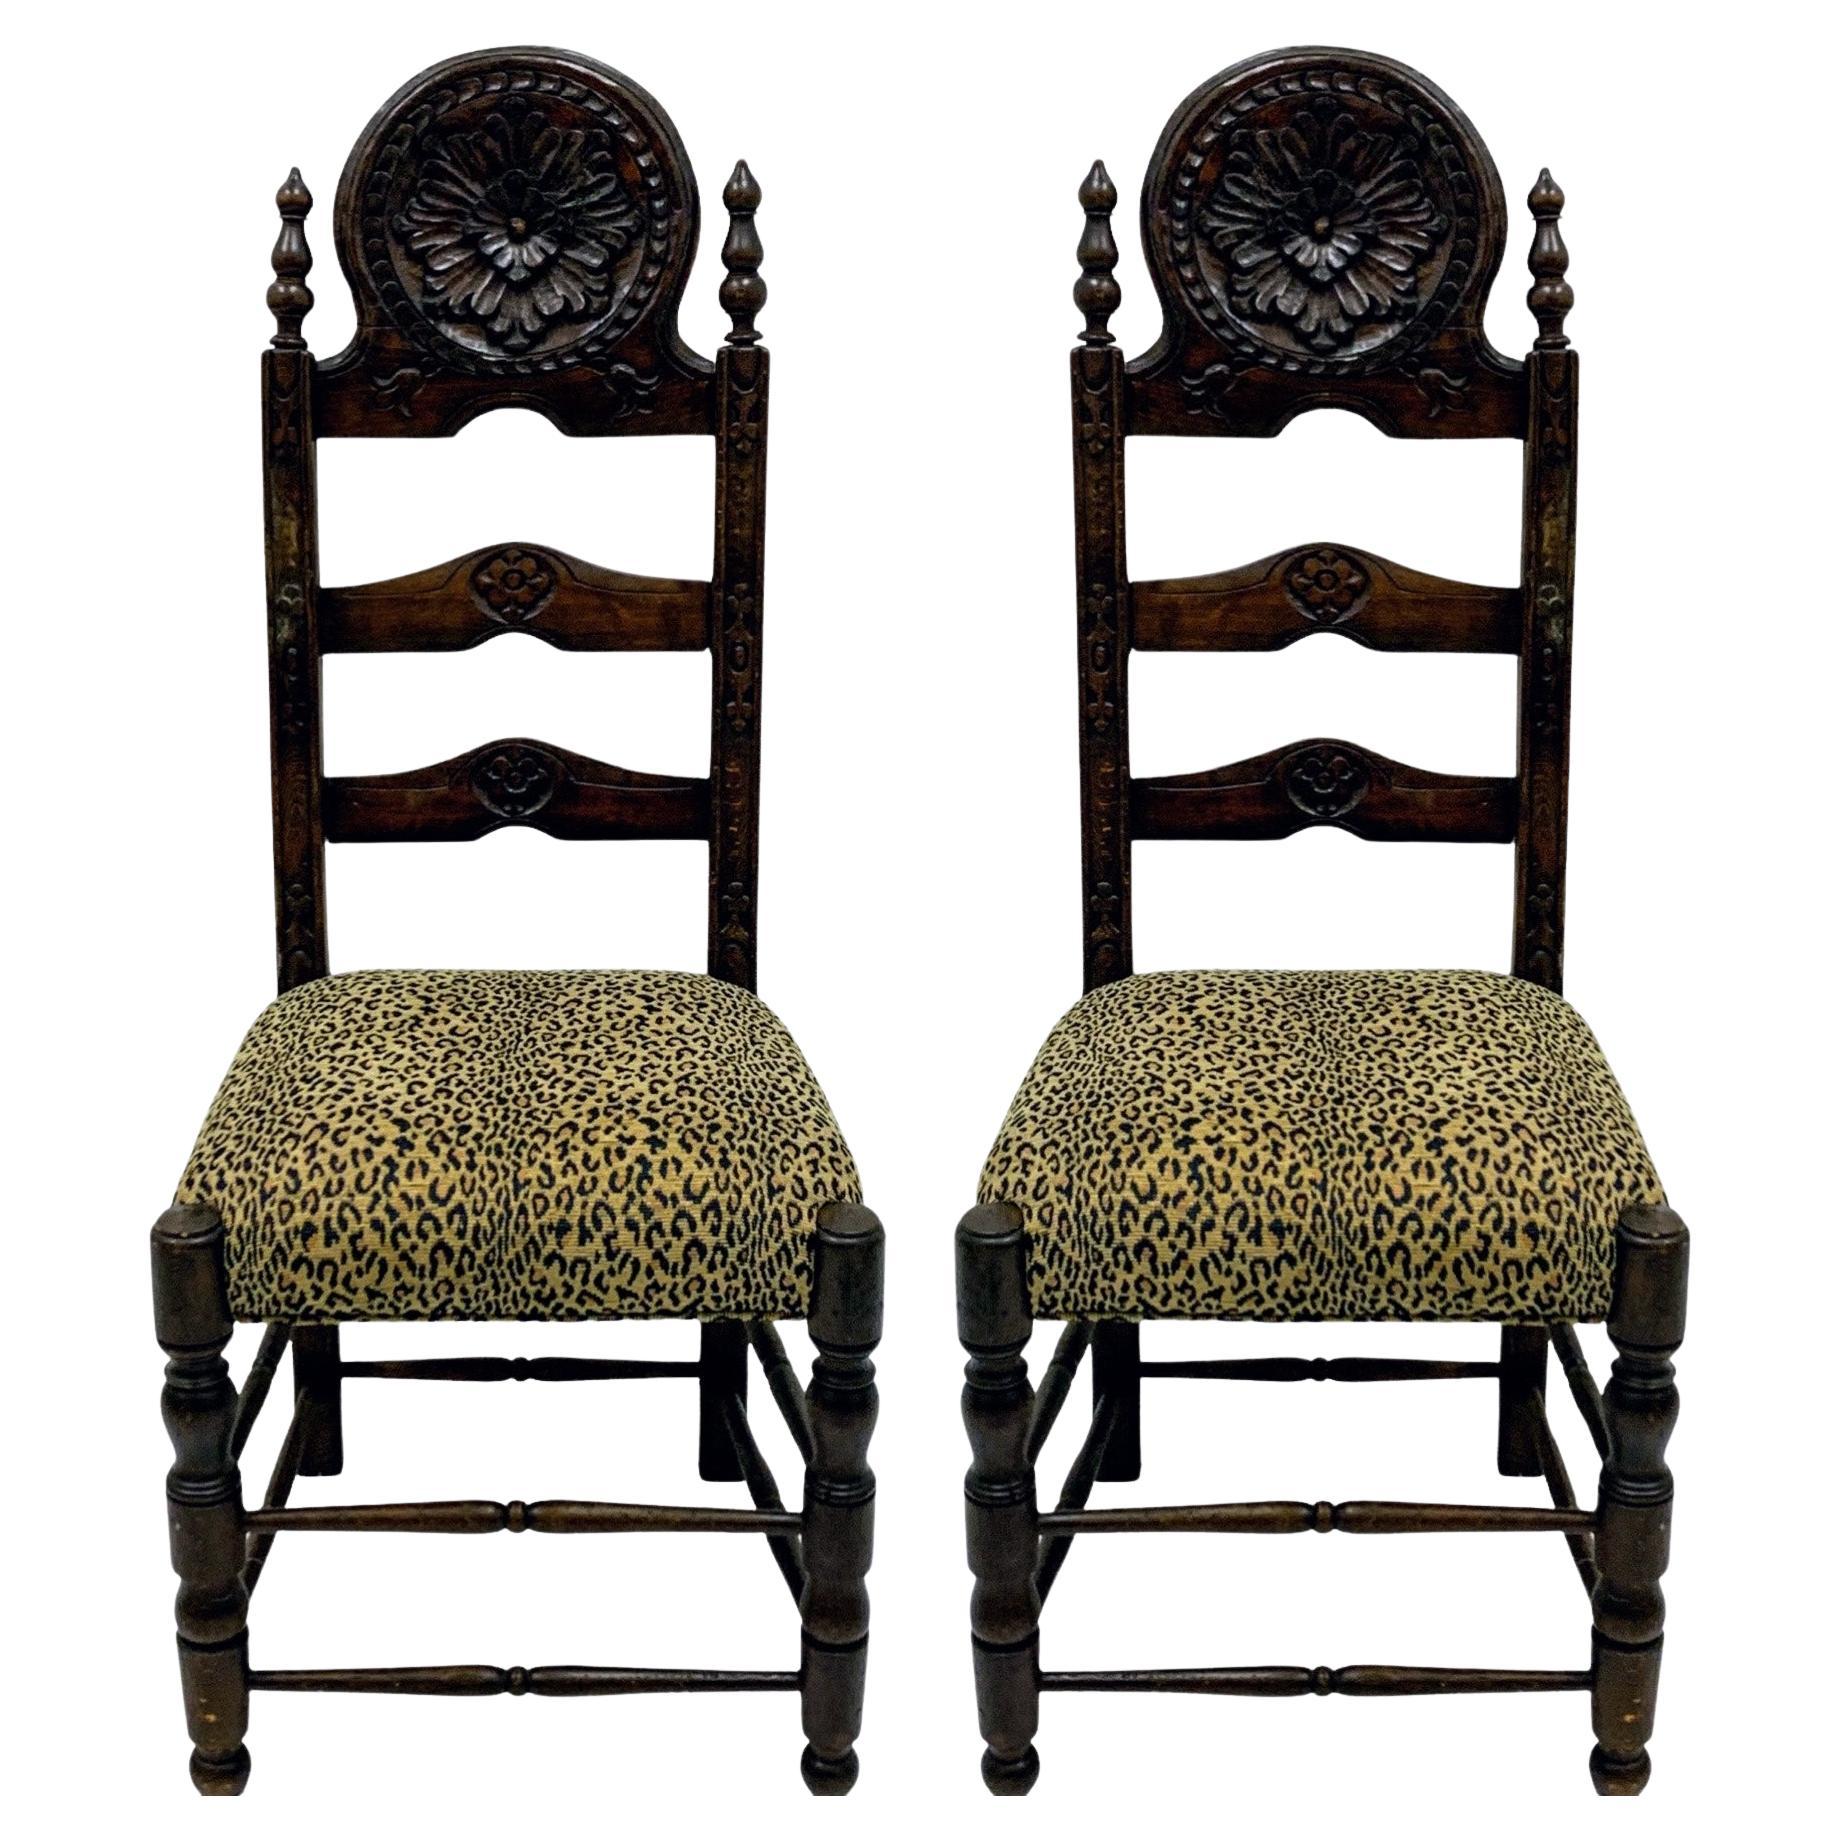 19th-C. French Carved Oak Ladder Back Side Chairs In Vintage Leopard - Pair